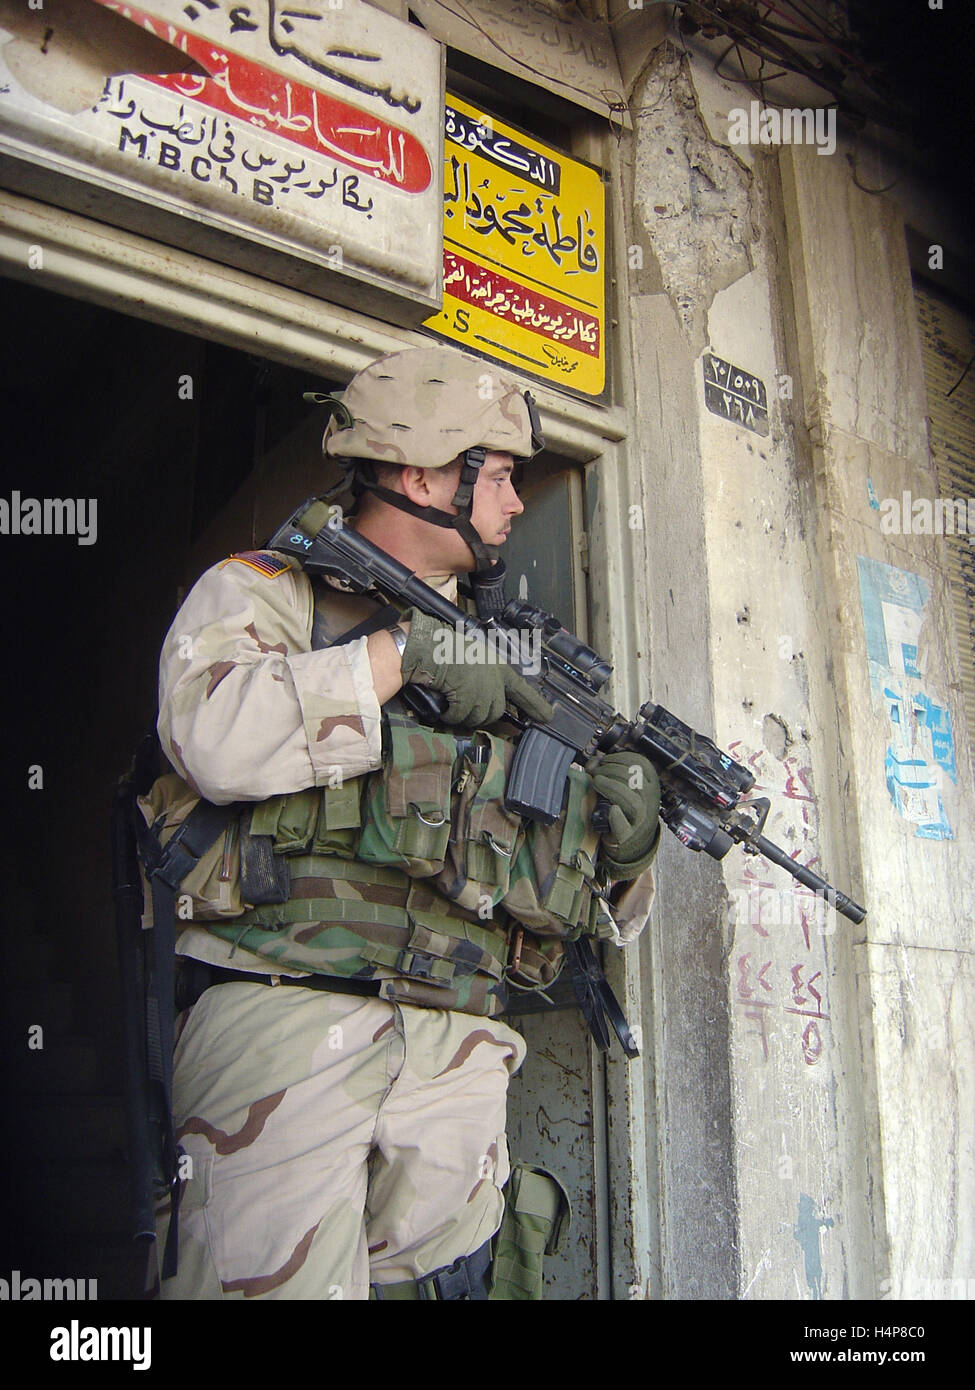 3rd December 2004 A U.S. Army soldier of the 1st Battalion, 24th Infantry Regiment, 'Deuce Four', on the streets of Mosul, Iraq. Stock Photo